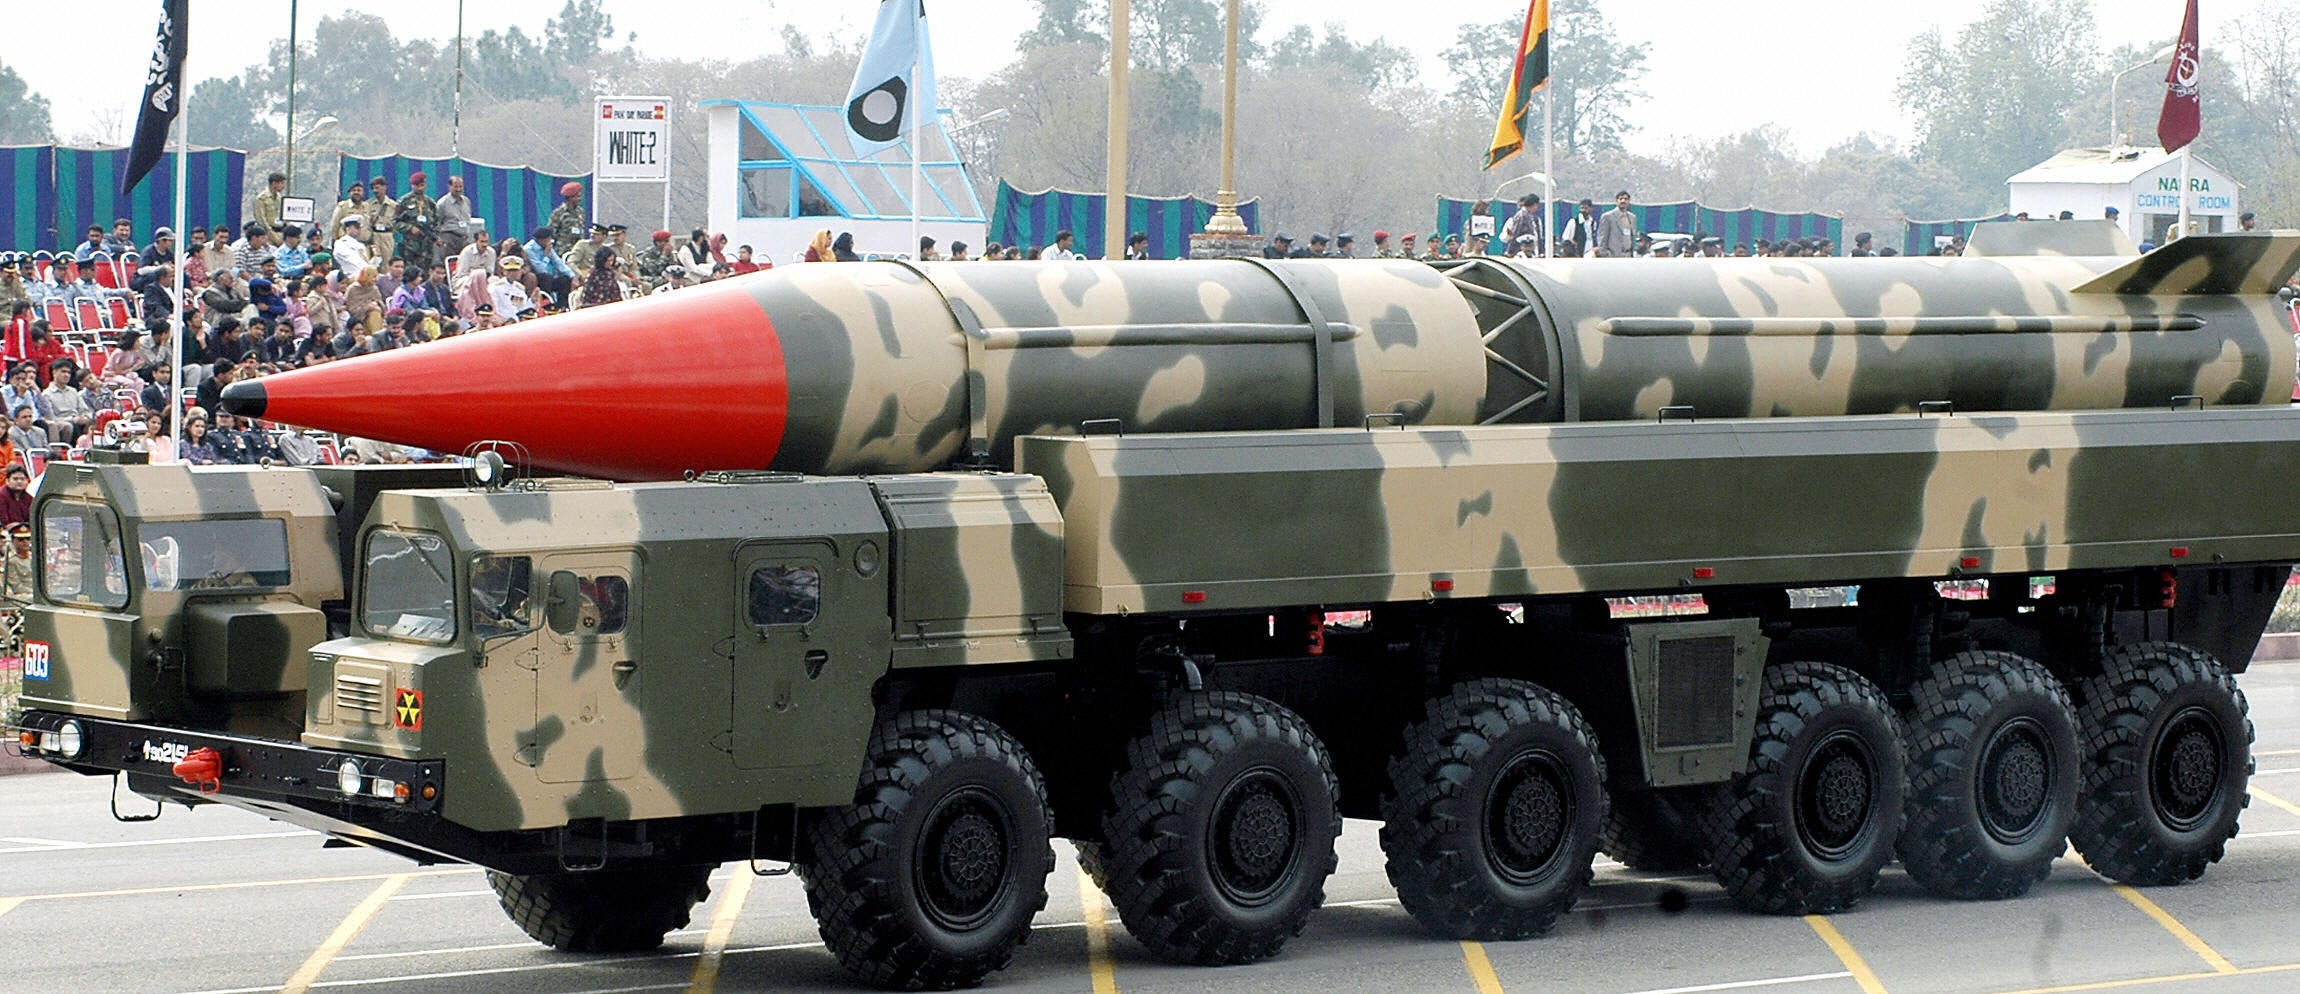 A nuclear-capable missile is paraded through Islamabad, Pakistan, in 2005. Pakistan, along with India, Israel, and South Sudan, are the only nations that have not signed the Nuclear Non-Proliferation Treaty.